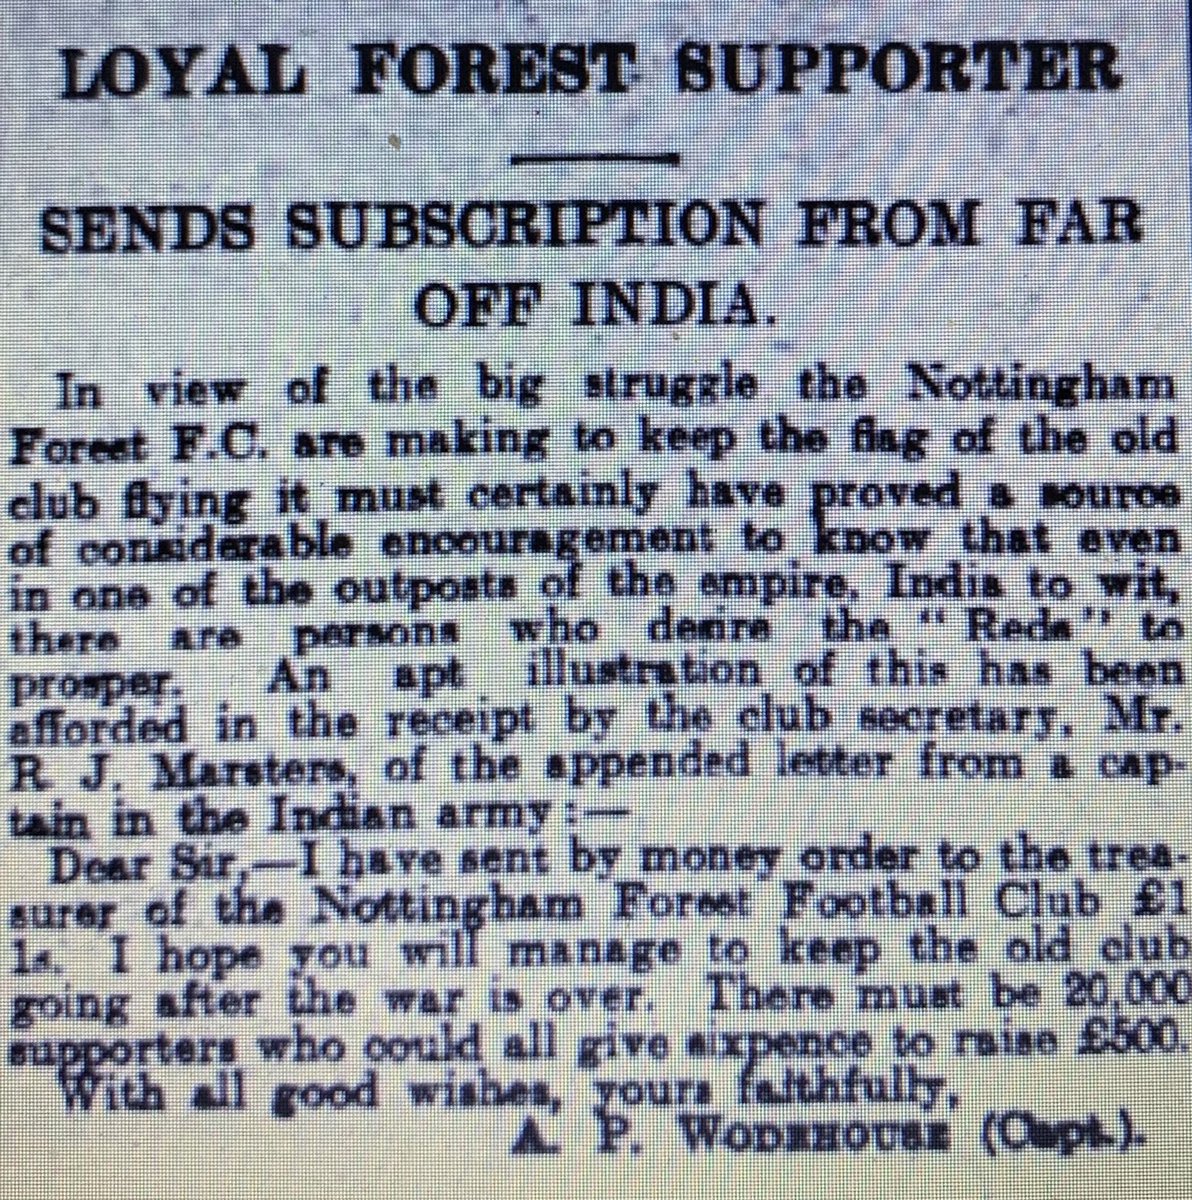 In 1915 Forest were in a perilous financial position with debts of £4,700. The future of the club was uncertain. Having heard of his club’s plight Captain Arthur Wodehouse, serving in India with the 110th Mahrattas, sent £1 1s to help ‘’keep the old club going.’’